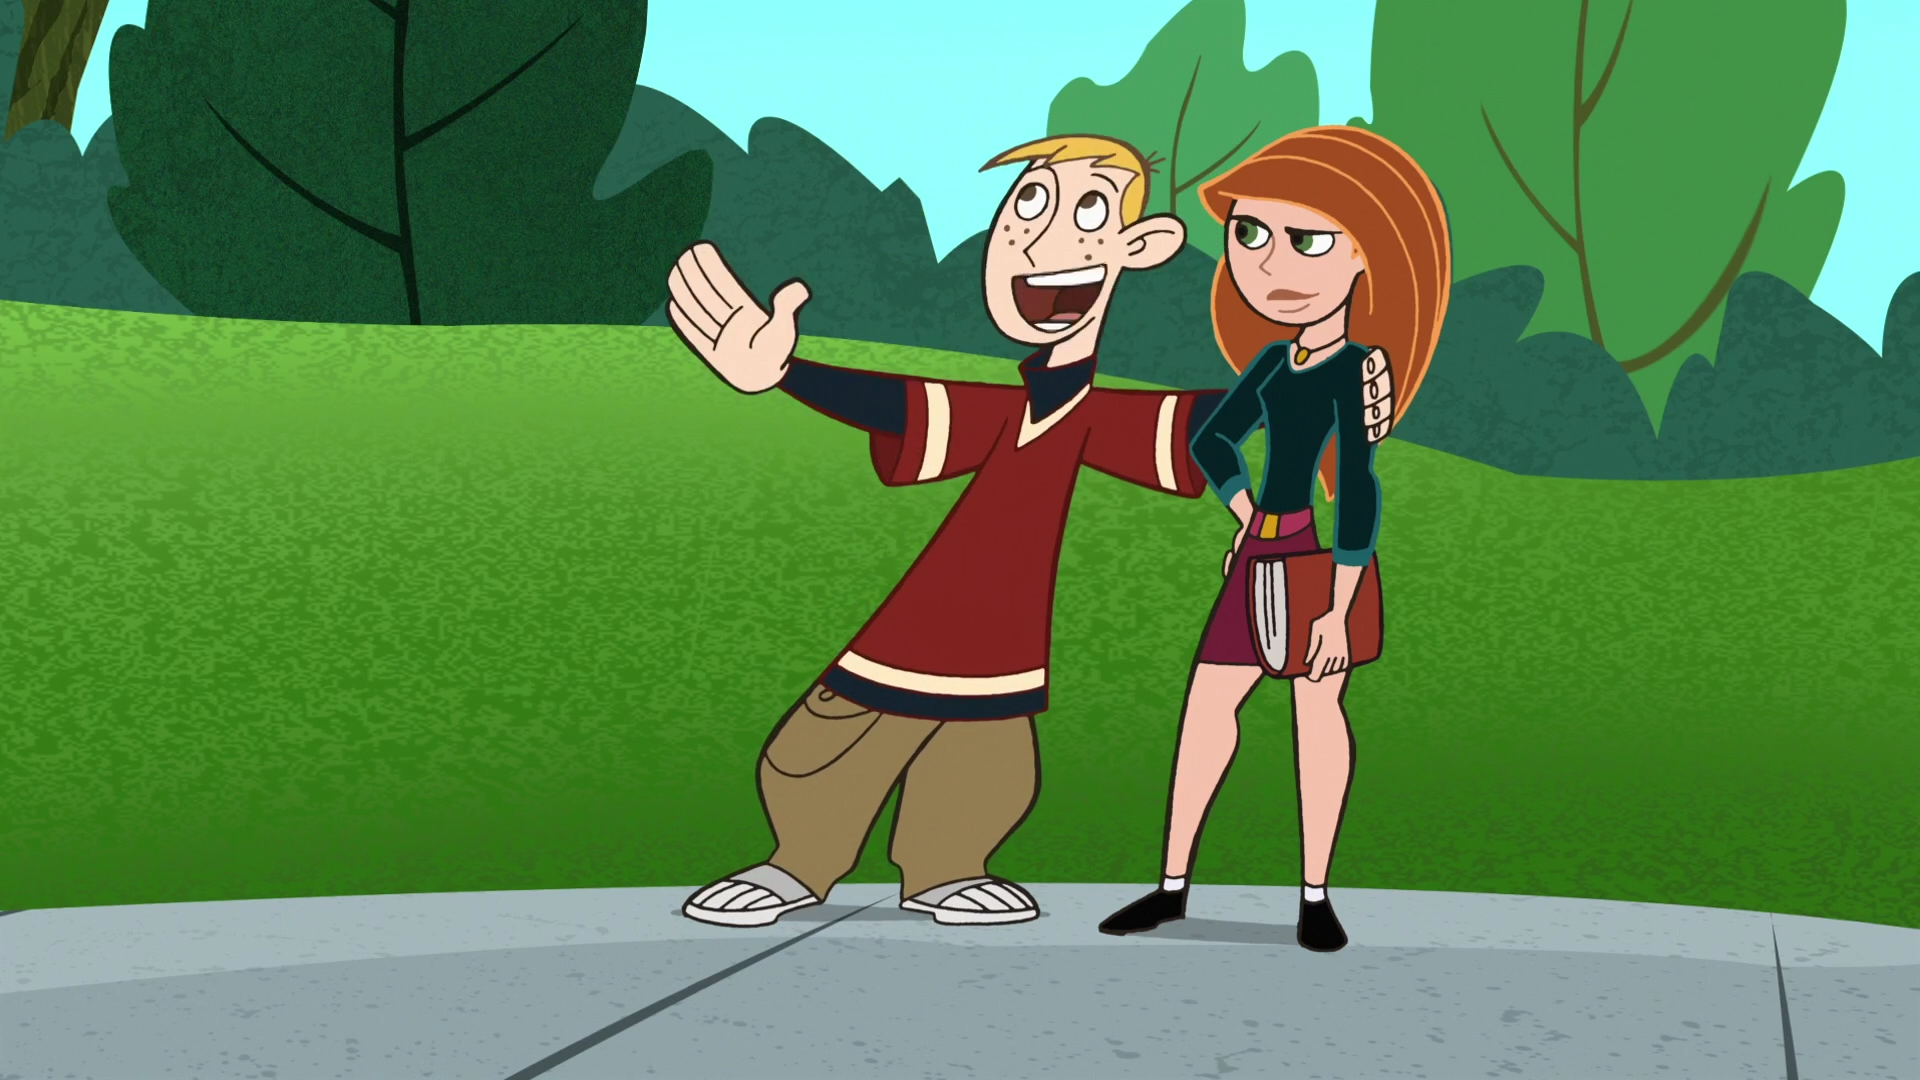 Download Kim Possible Character Cartoon Disney Ron Stoppable Kim Possible TV Show TV Show